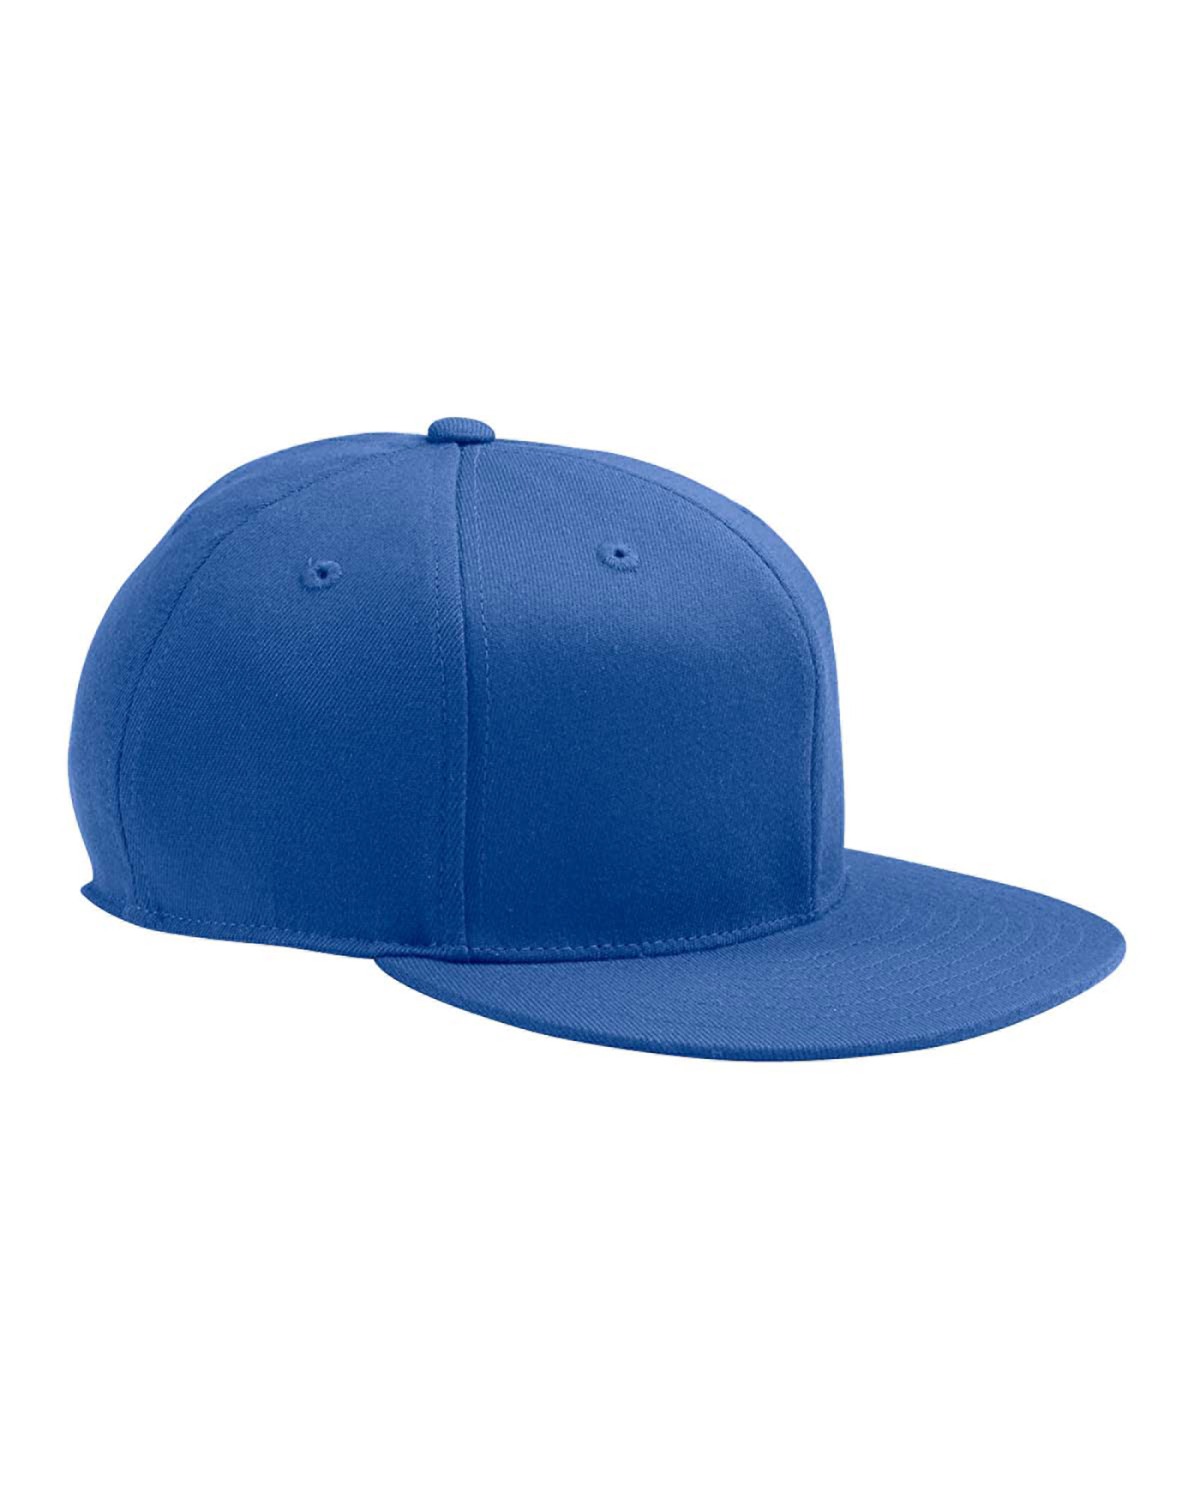 EastWest Embroidery 6210 - Constructed Brushed Cotton Twill Cap